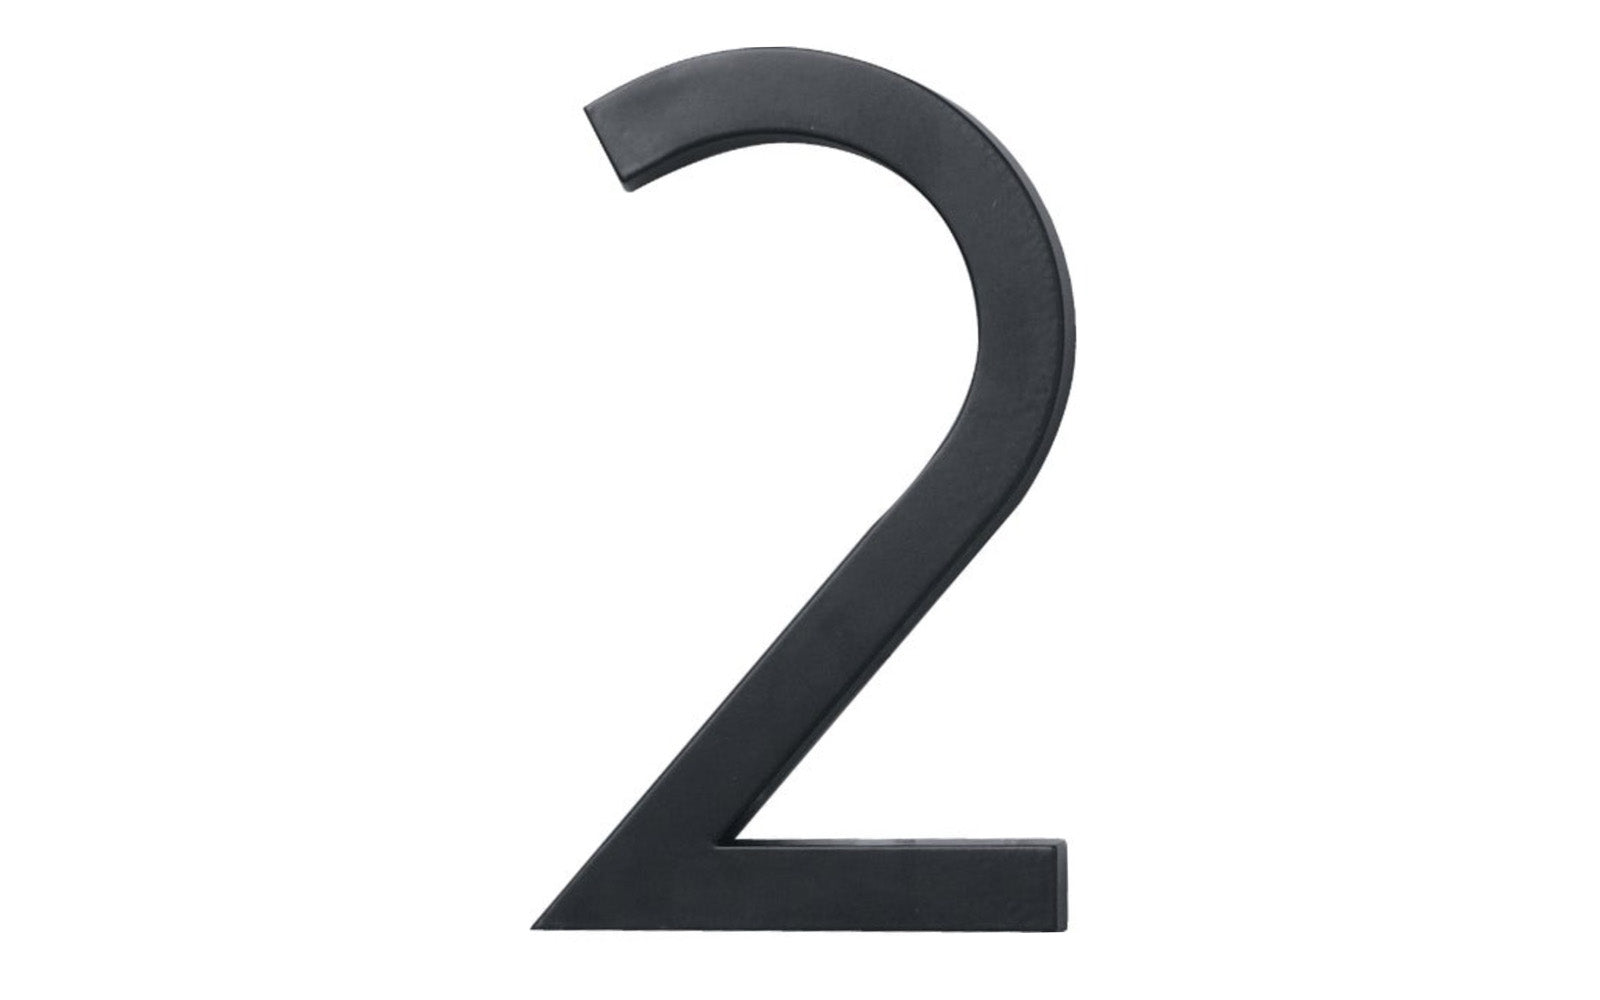 Number Two House Number in a classy architectural style design. Satin black finish. 6" size house number with 1/2" material thickness. Can be installed flush mount or floating mount (elevated from wall for a shadow effect). #2 House Number. Hy-Ko Model No. FM-6/2. 029069310721